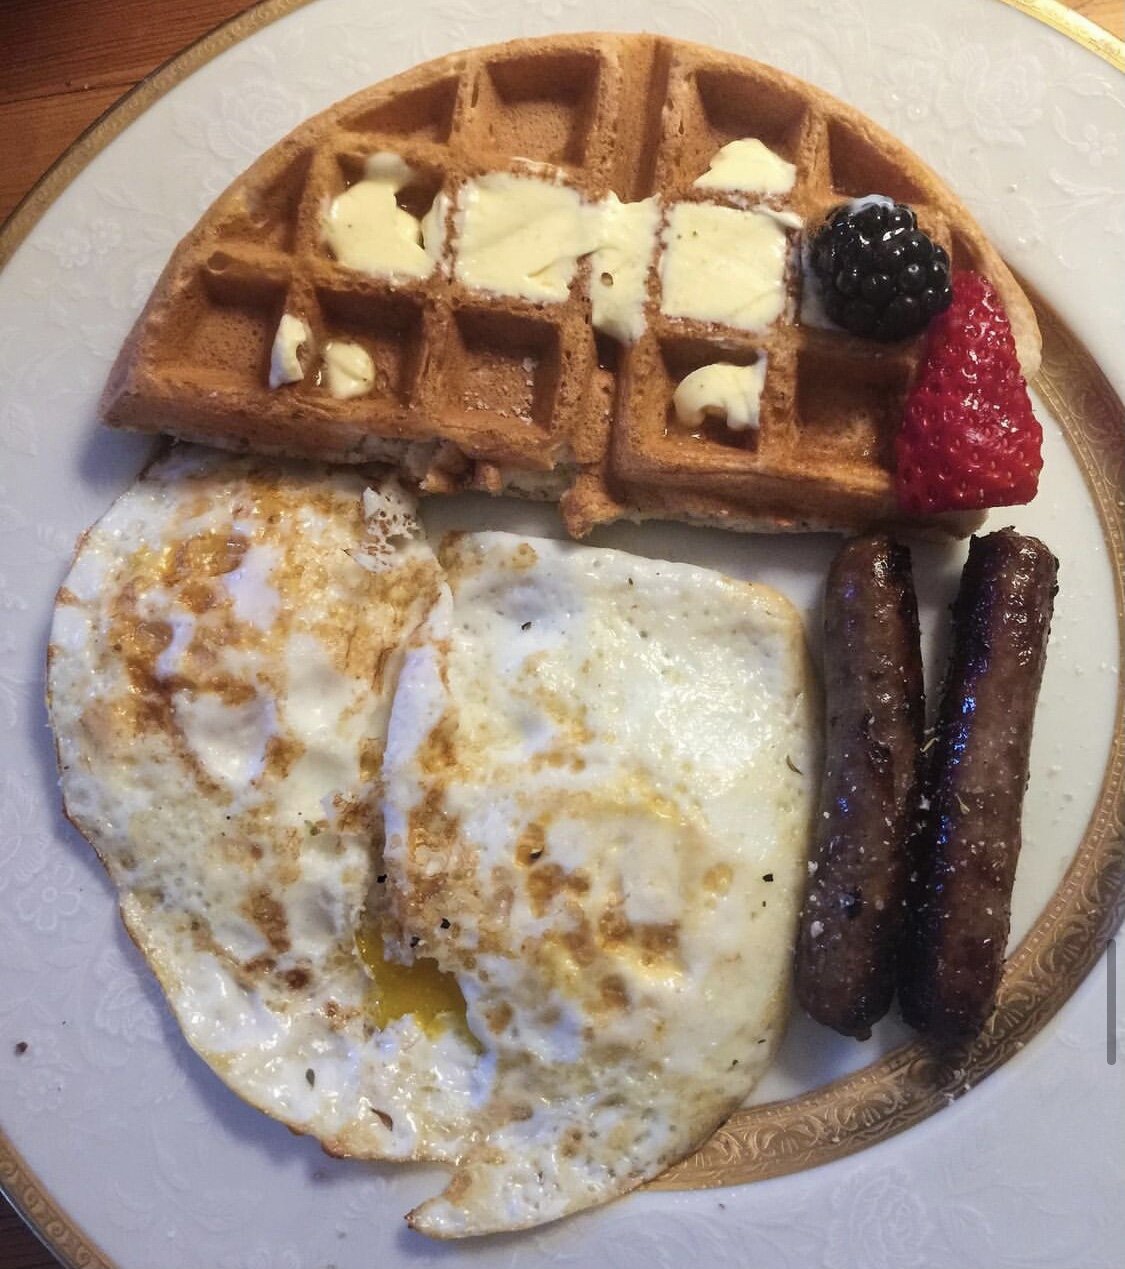 Waffle, eggs over medium, sausage, and some fresh fruit